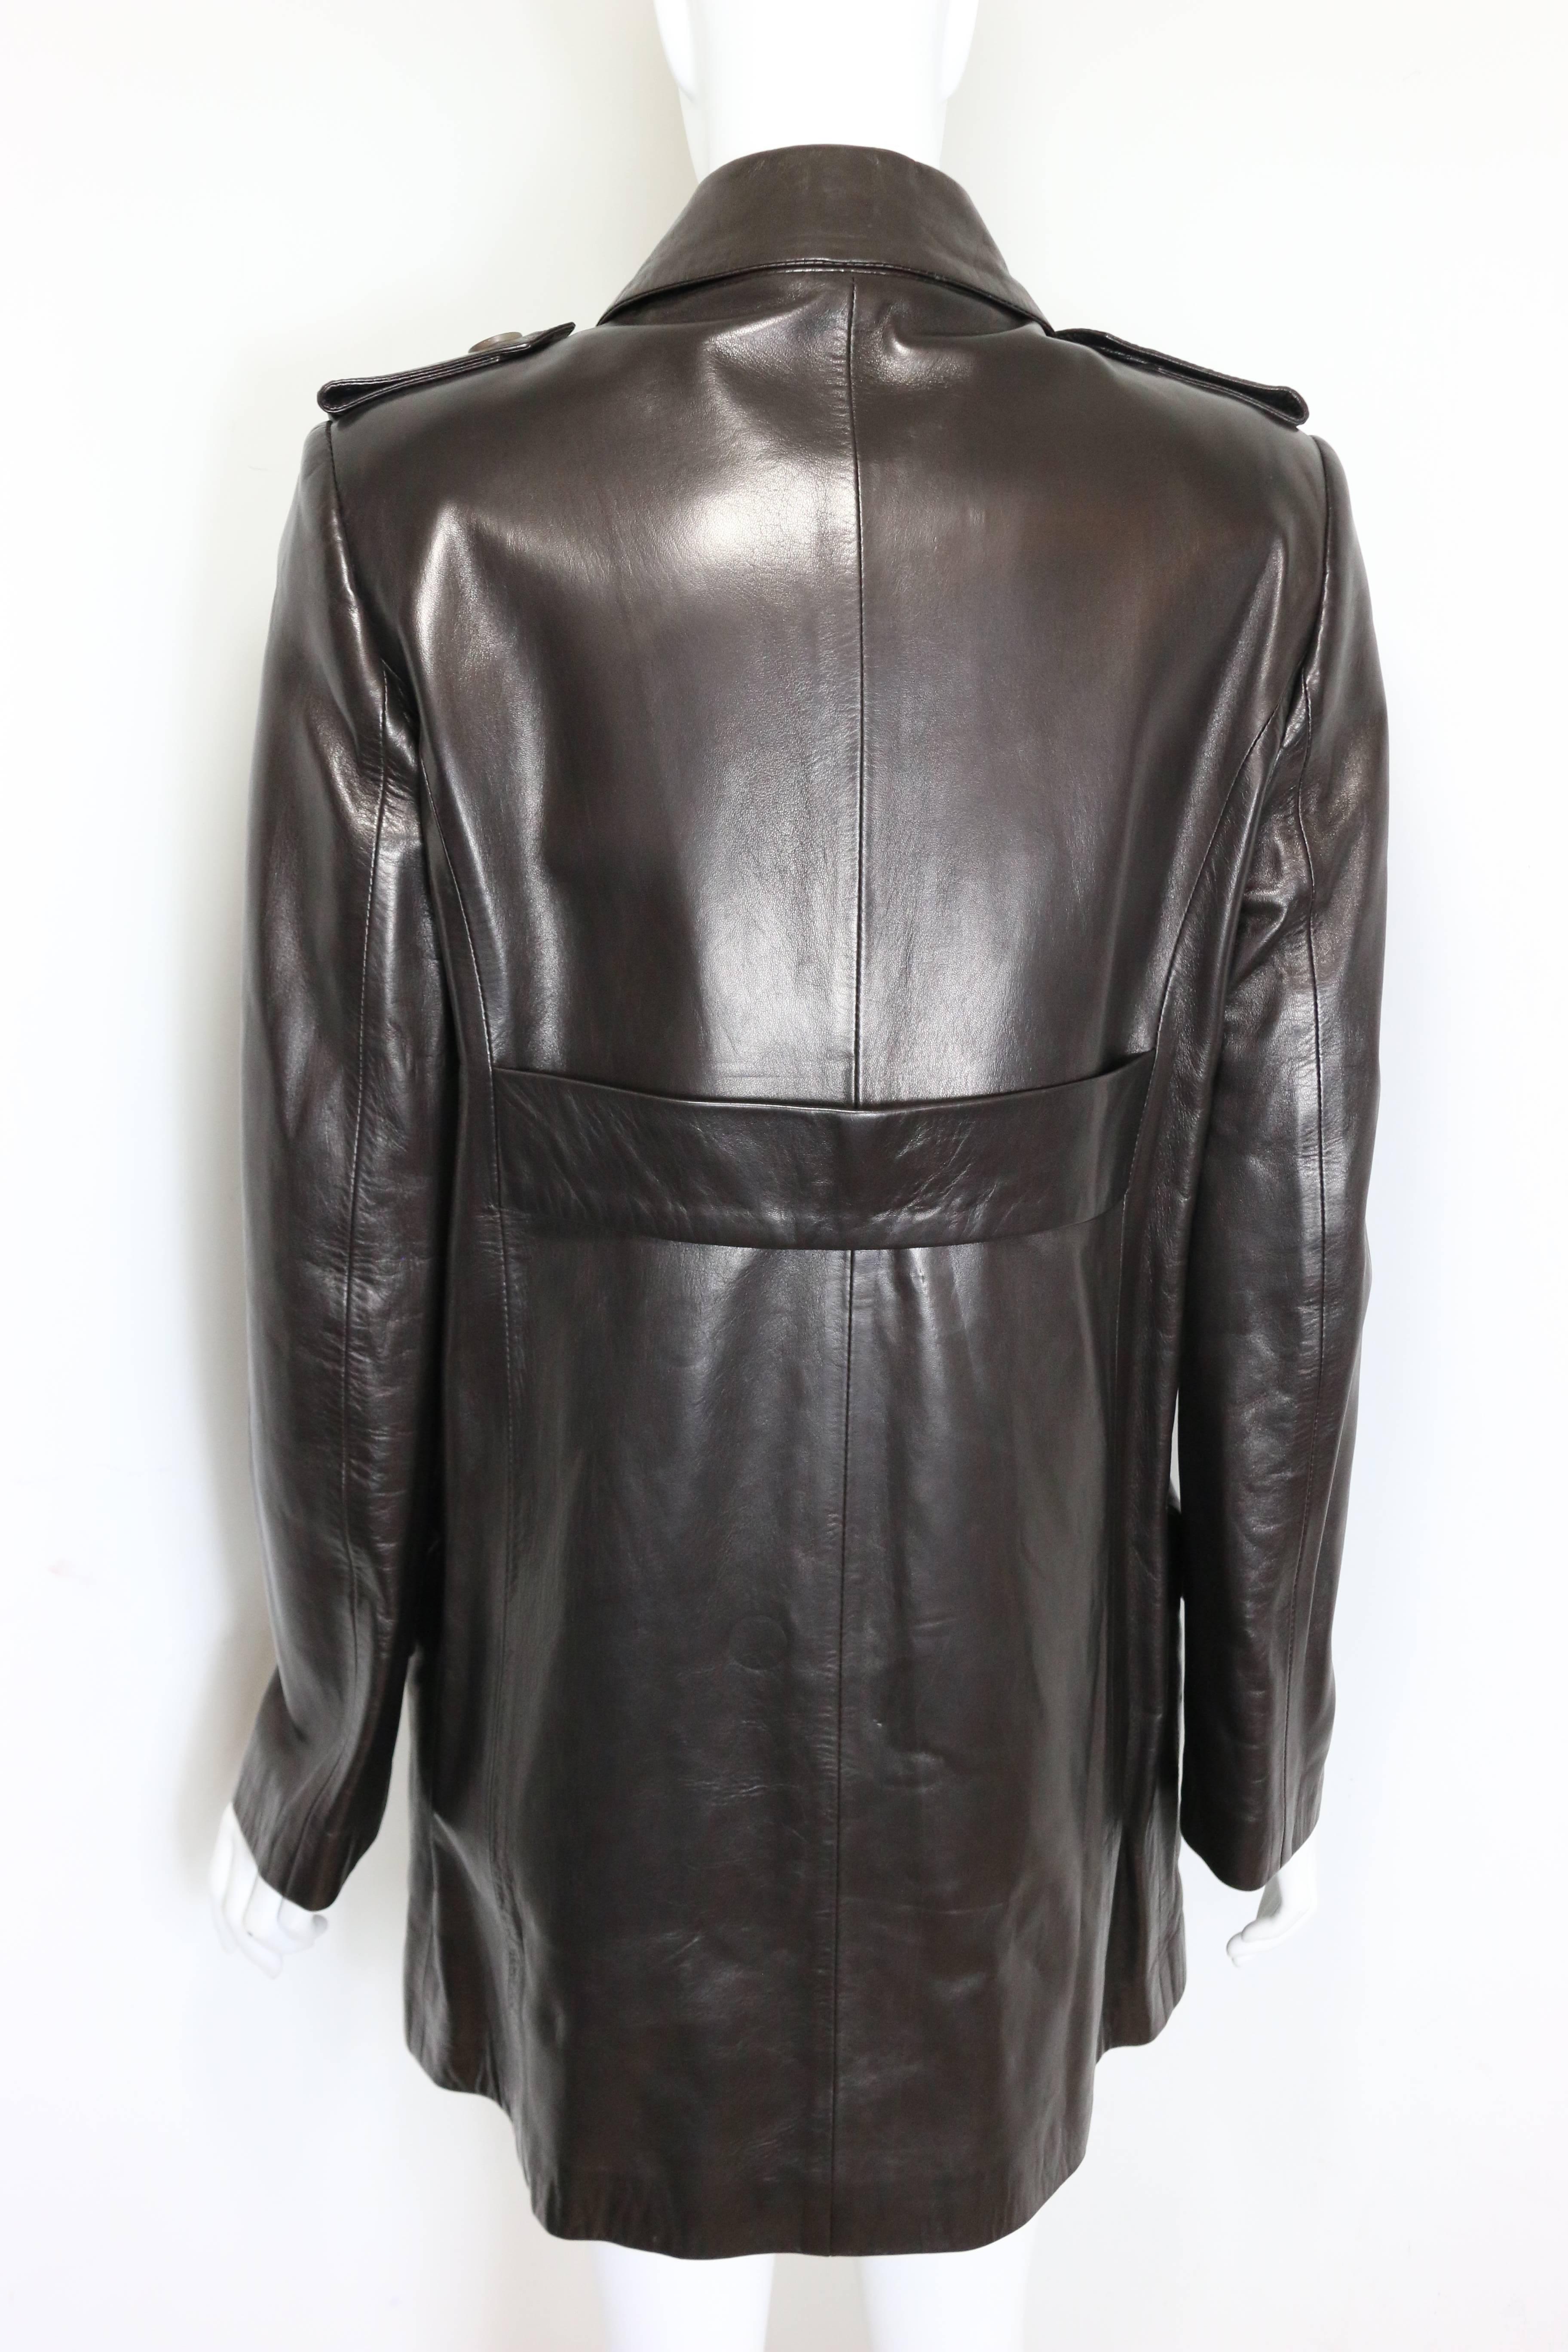 - Gucci by Tom Ford brown lambskin leather double breasted Jacket from Fall 1996 collection. 

- Featuring twelve buttons fastening. Four flap pockets, Epaulette style with button details and a strap at the back. 

- Made in Italy. 

- Size 42. 

-